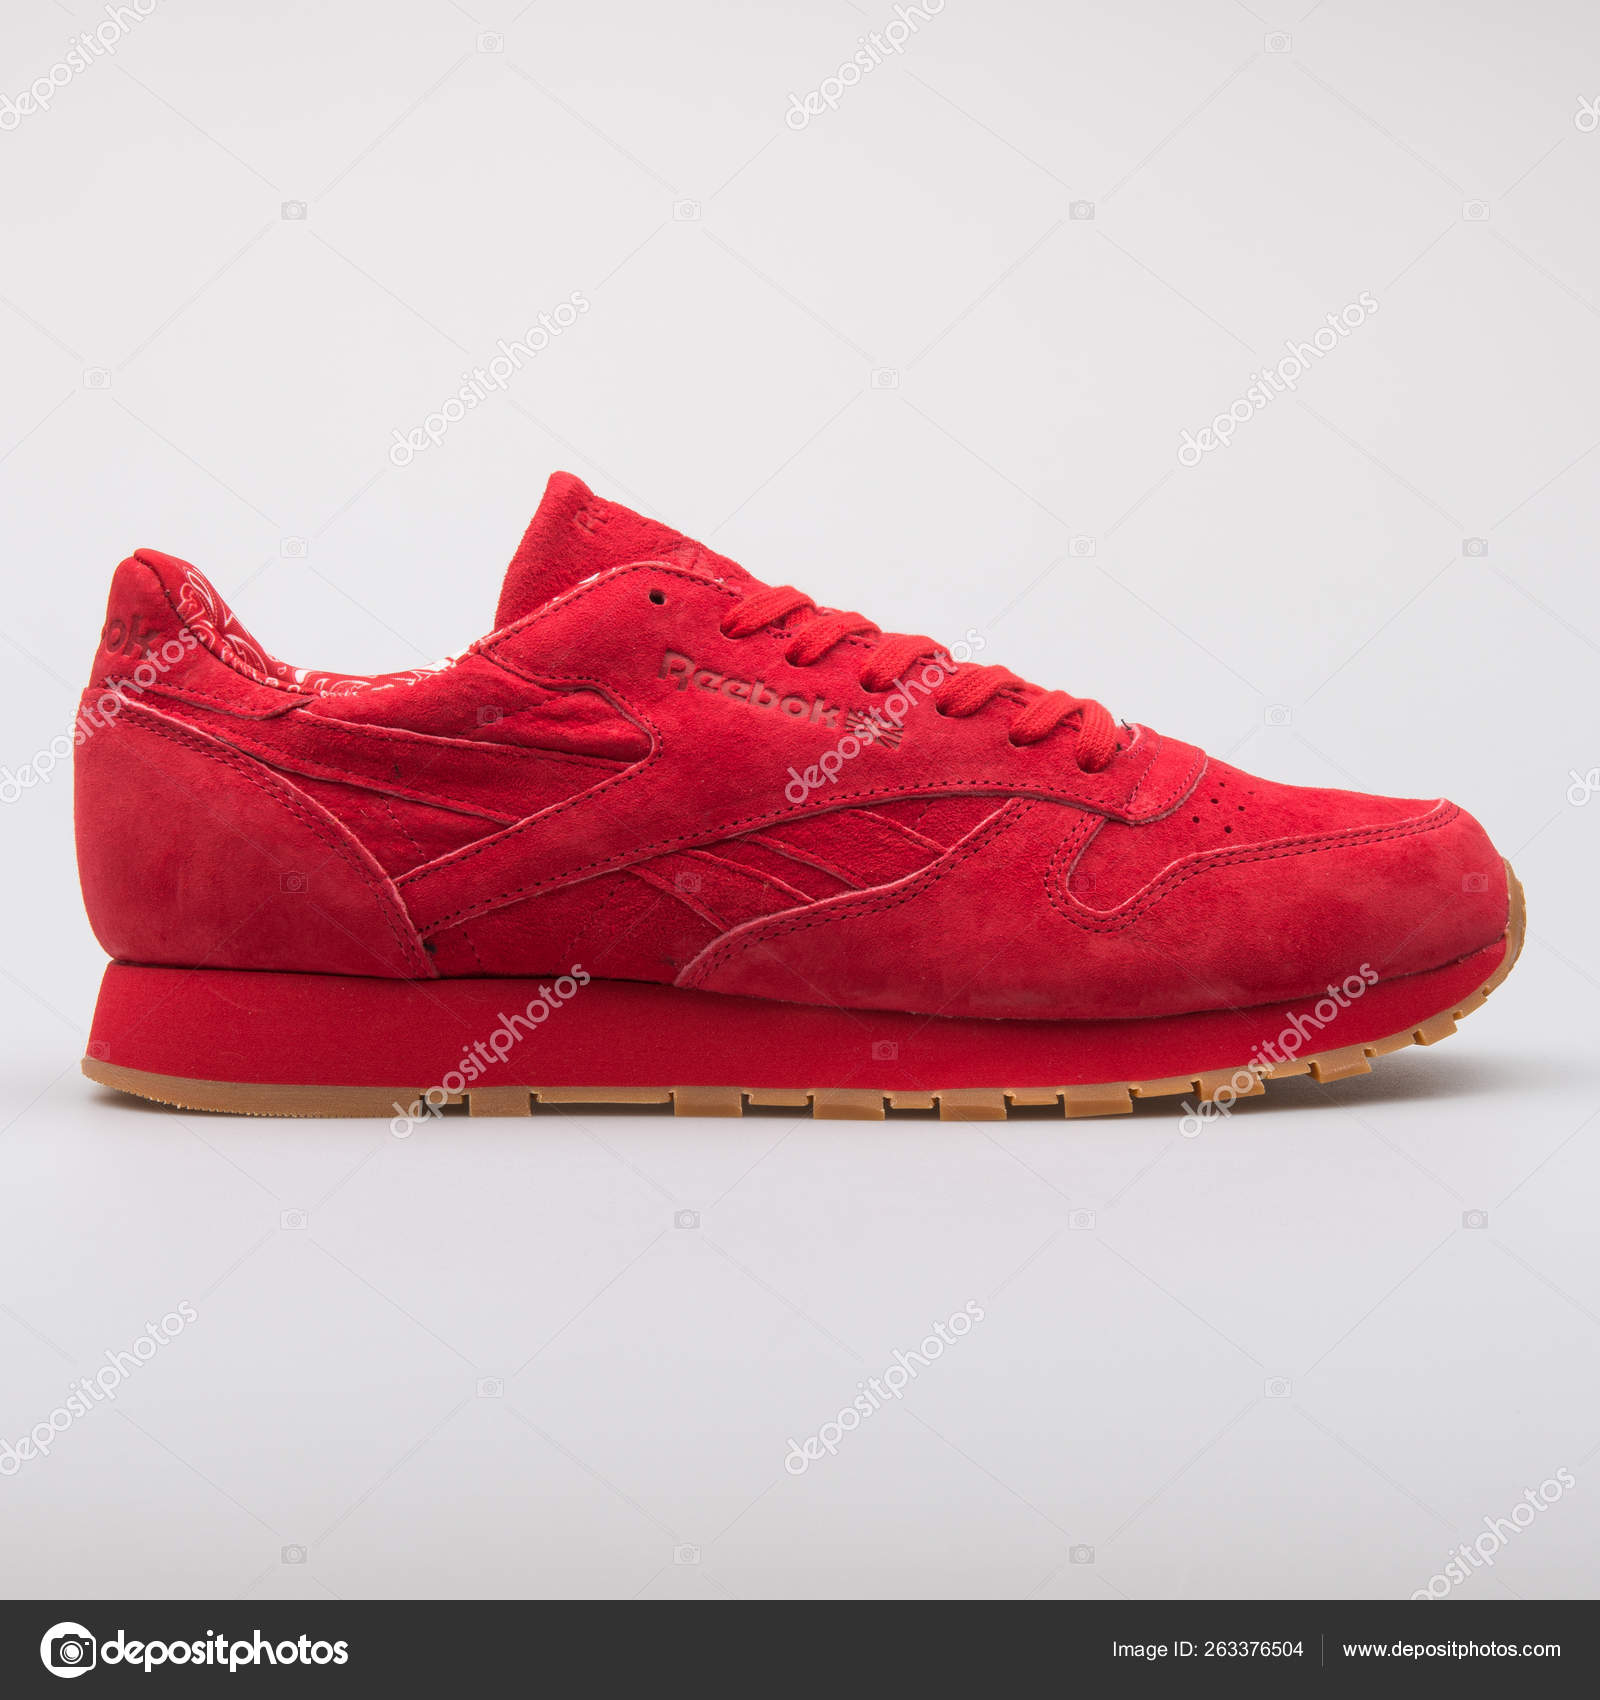 Reebok Classic CL Leather red – Editorial Photo © xMarshallfilms #263376504